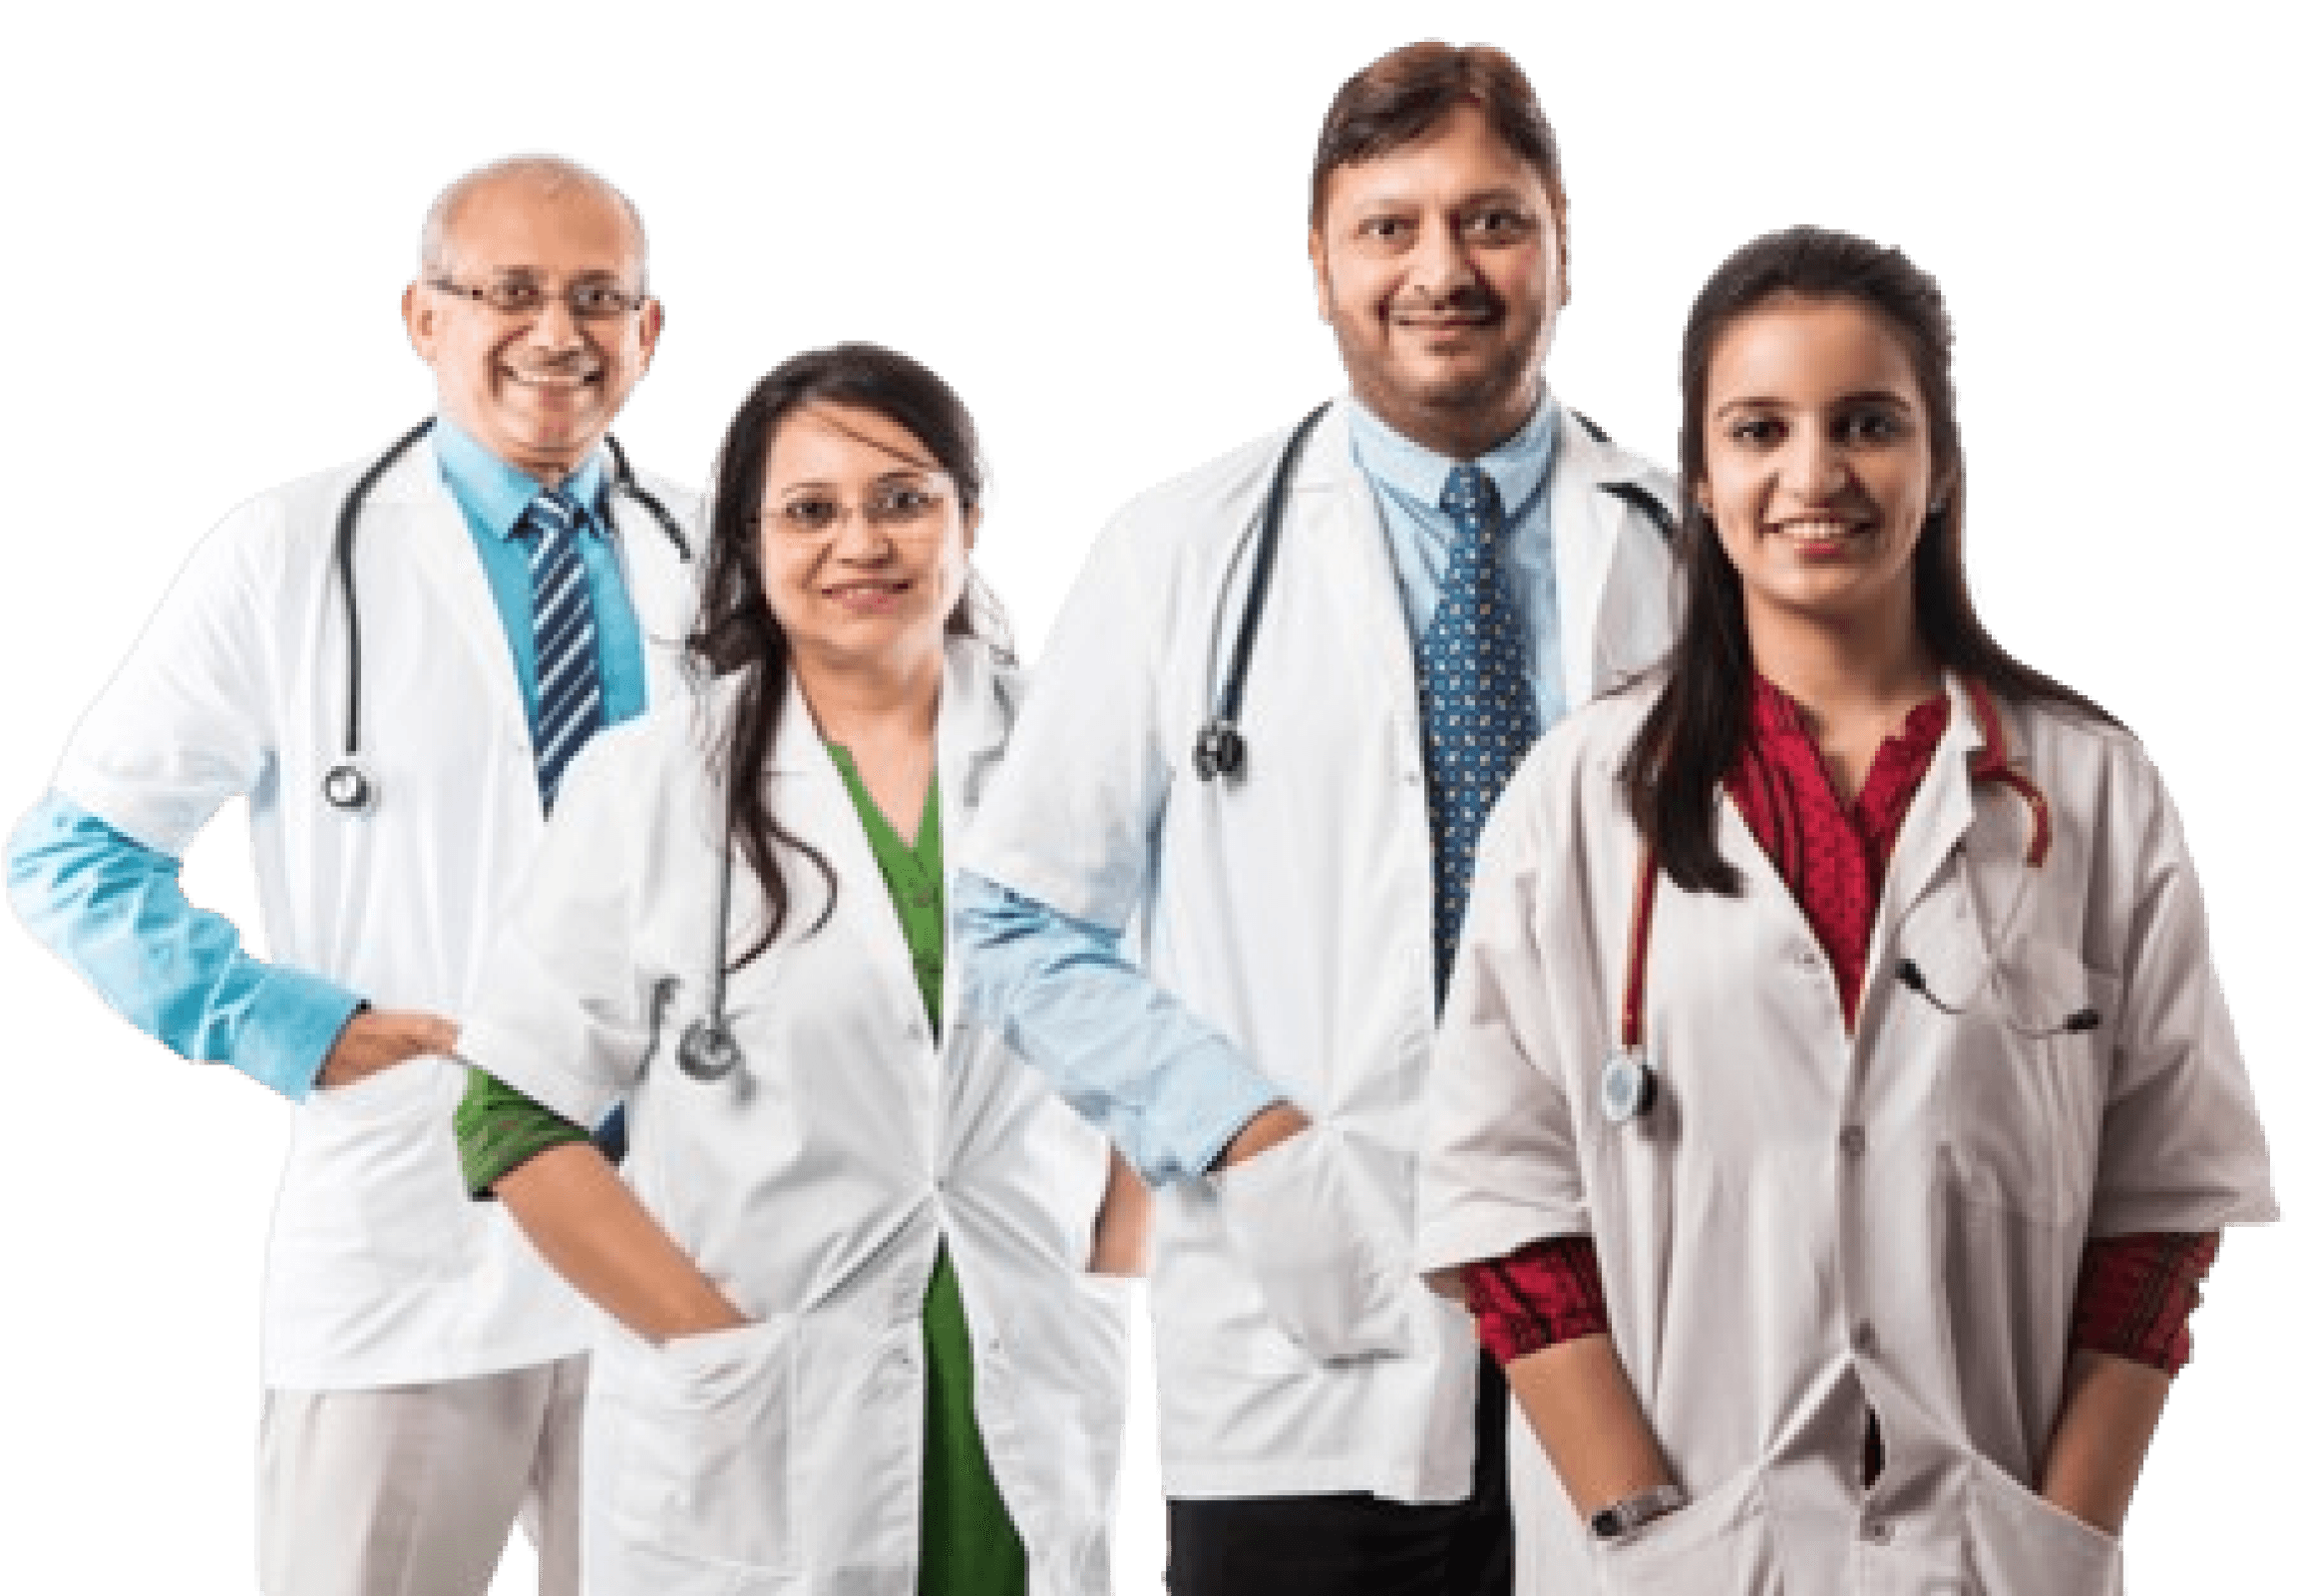 AboutDoctors